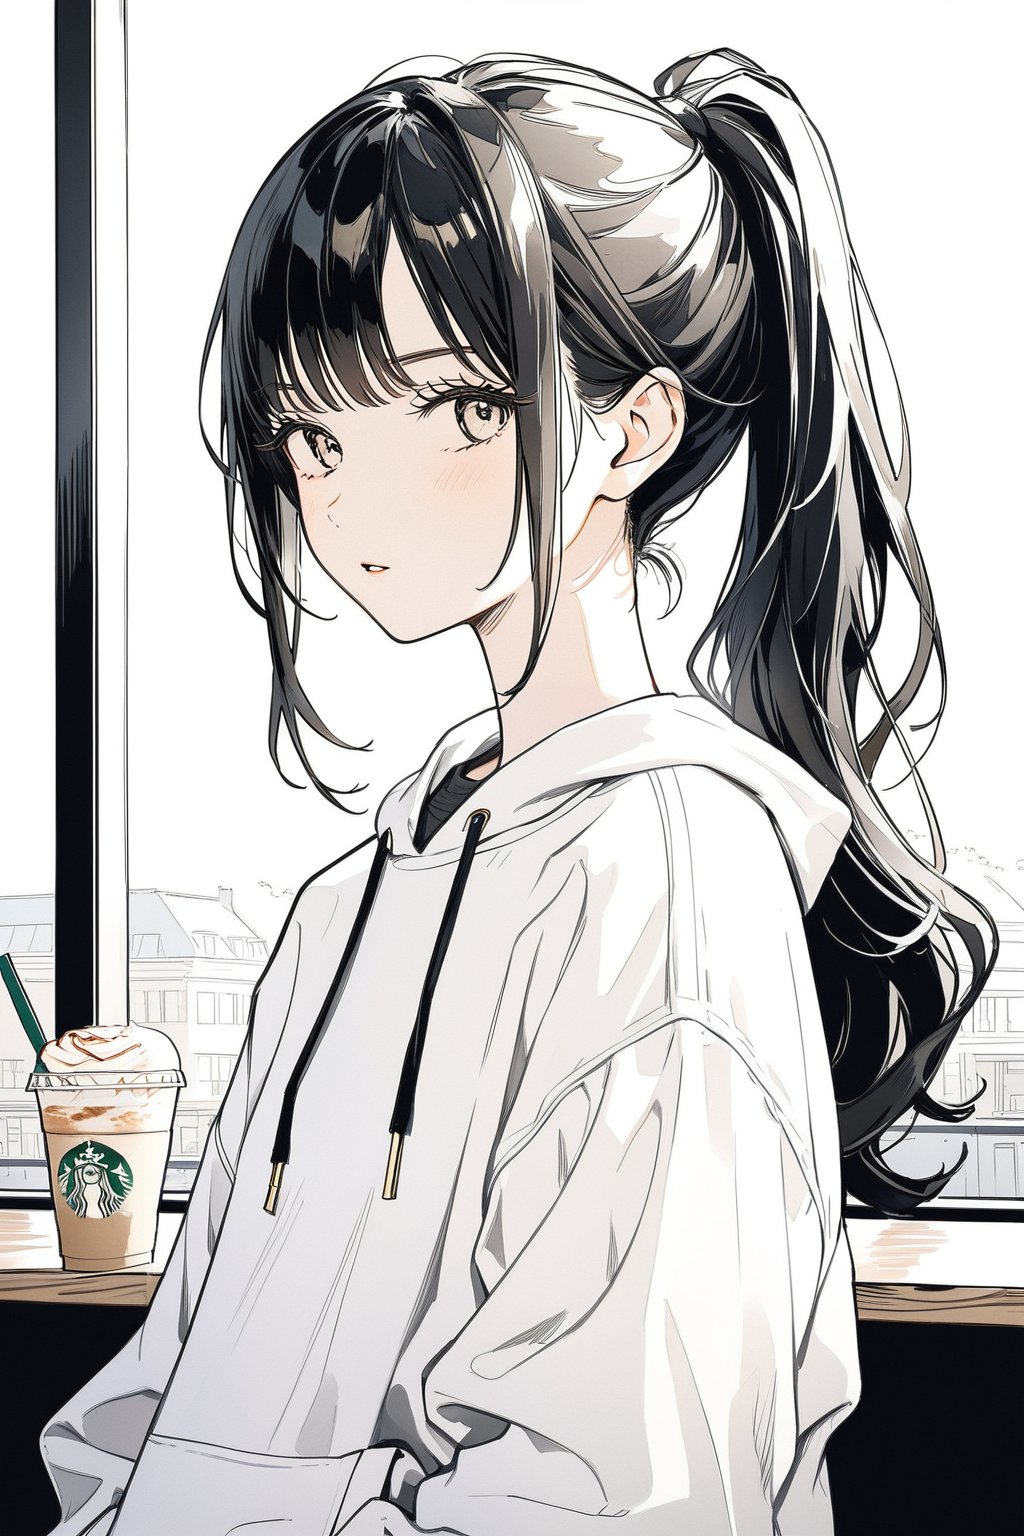 1girl, solo_female, long hair, black hair, ponytail, masterpiece, white sweatshirt, gold eyes, cold expression, looking_at_the_viewer, wearing white denim shorts, portrait, closeup, tall girl, simple_background, outdoors in a cafe, starbucks, bright lighting, dramatic lighting, beautiful, lineart,txznf, standing